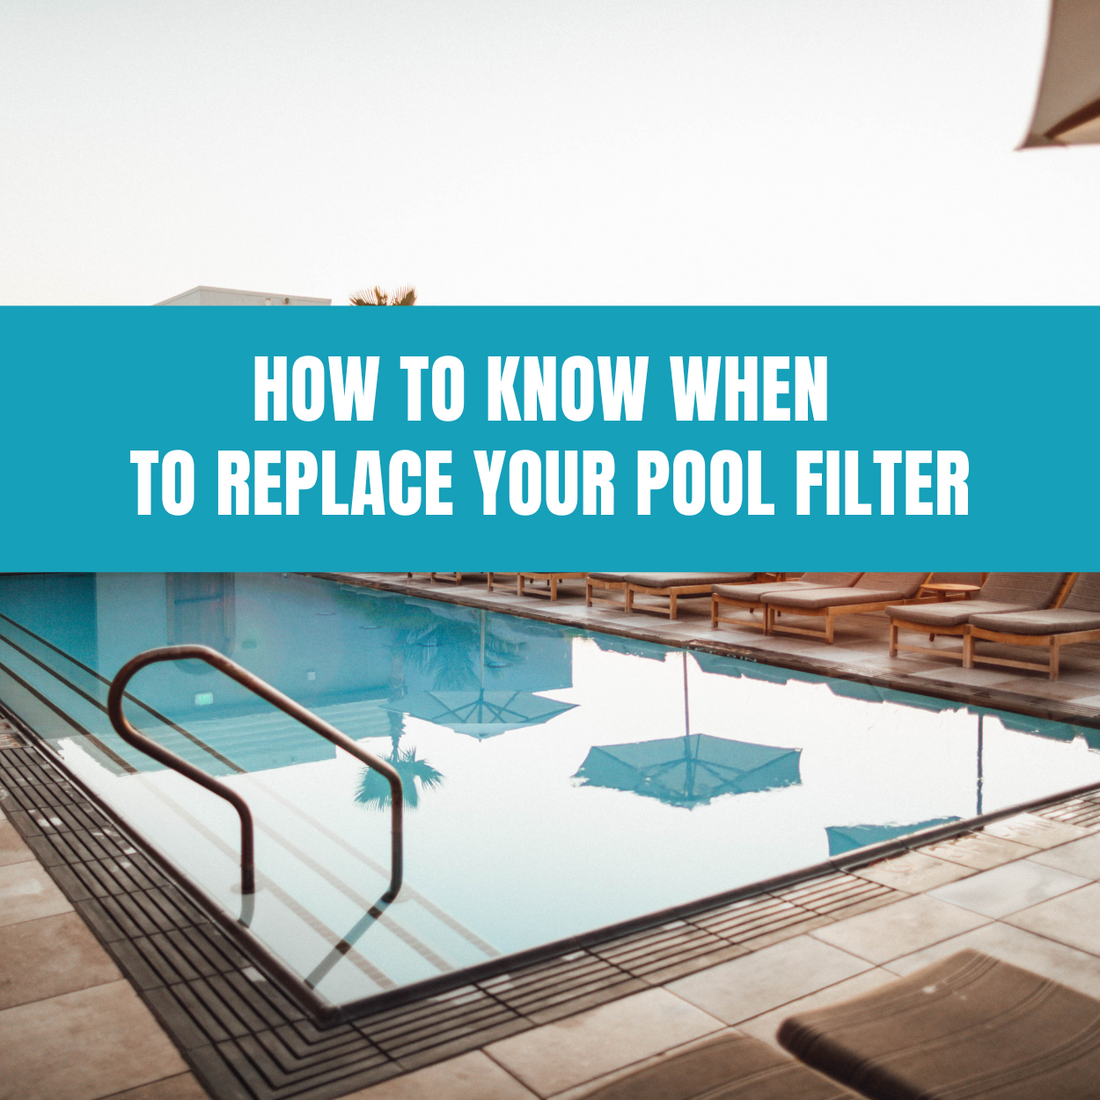 Signs that indicate it's time to replace your pool filter for maintaining clean and safe water